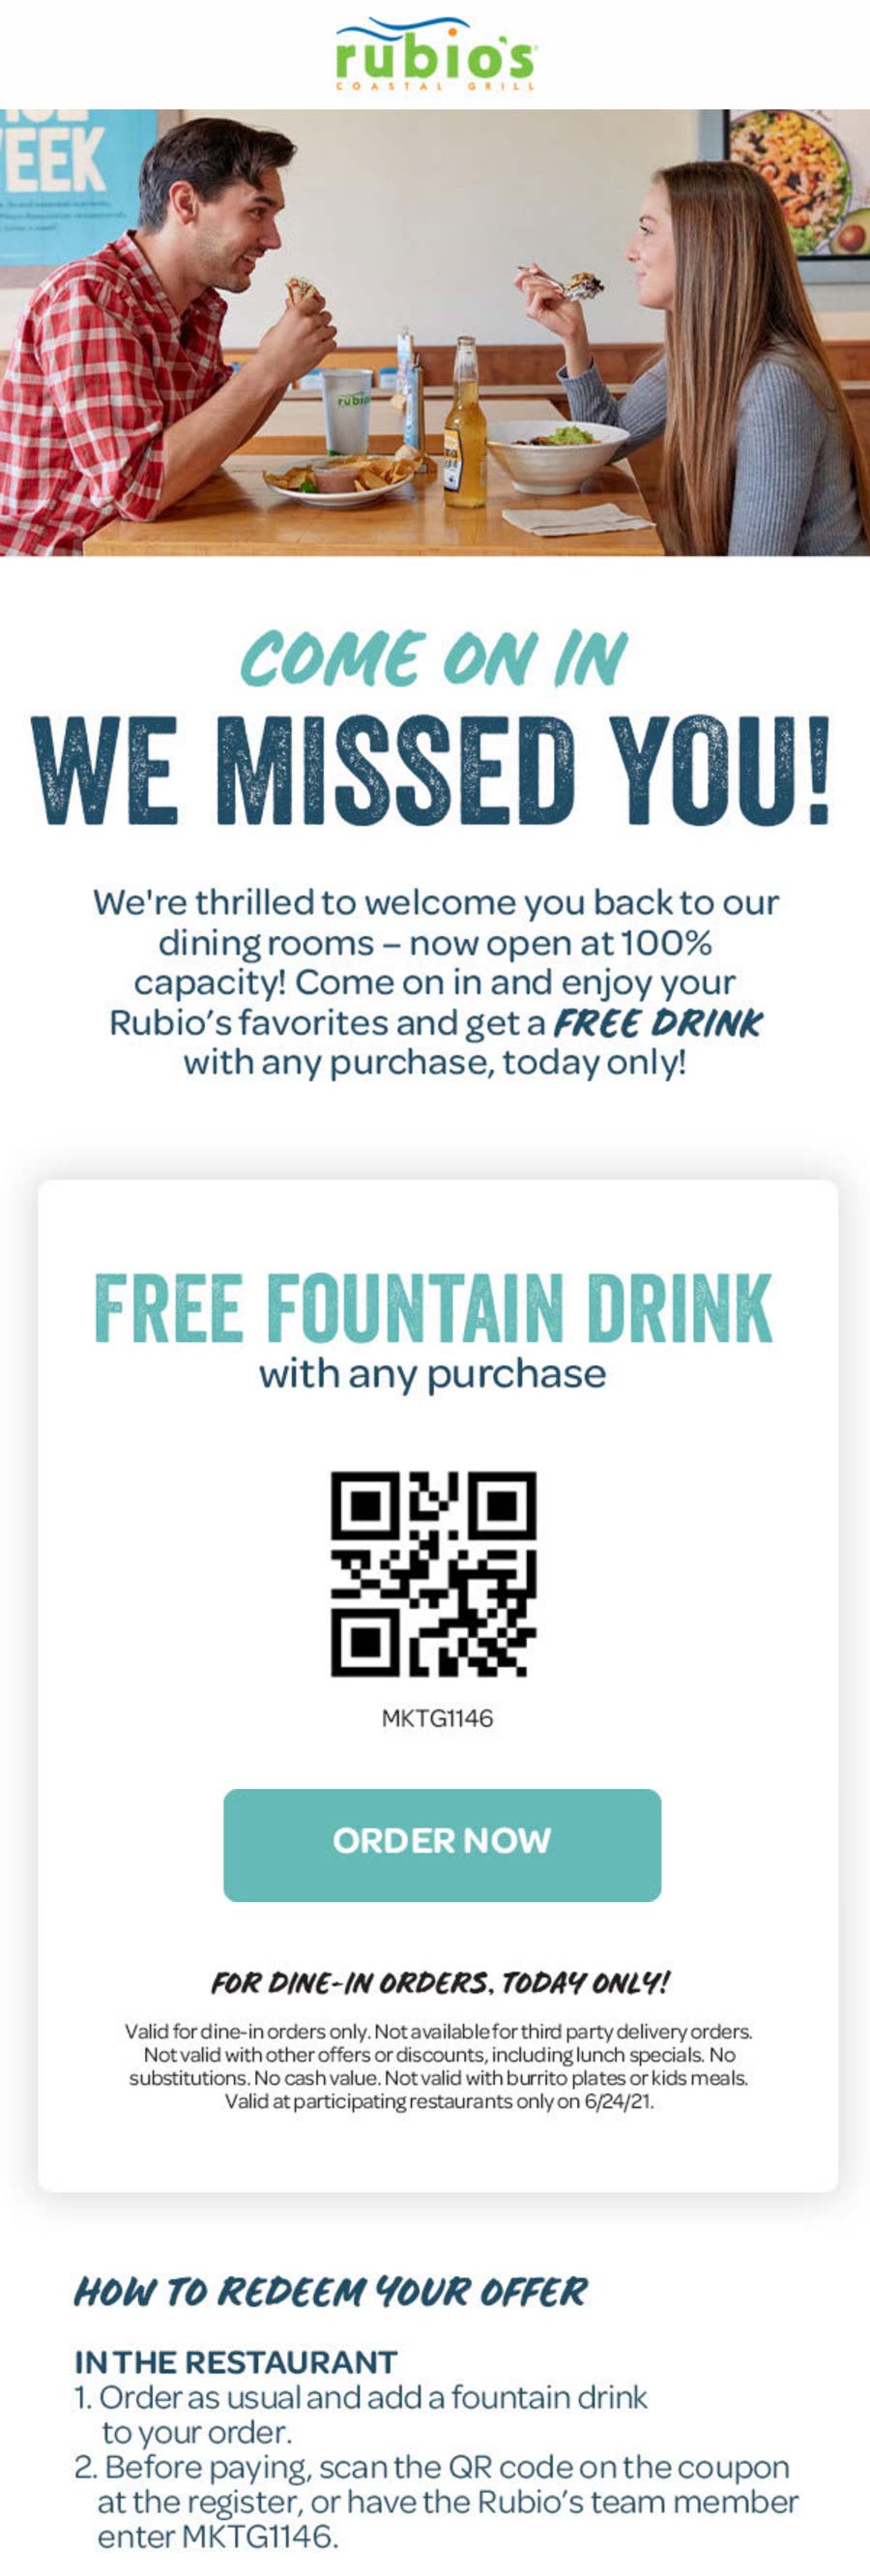 Rubios restaurants Coupon  Free drink with your order today at Rubios Coastal Grill #rubios 